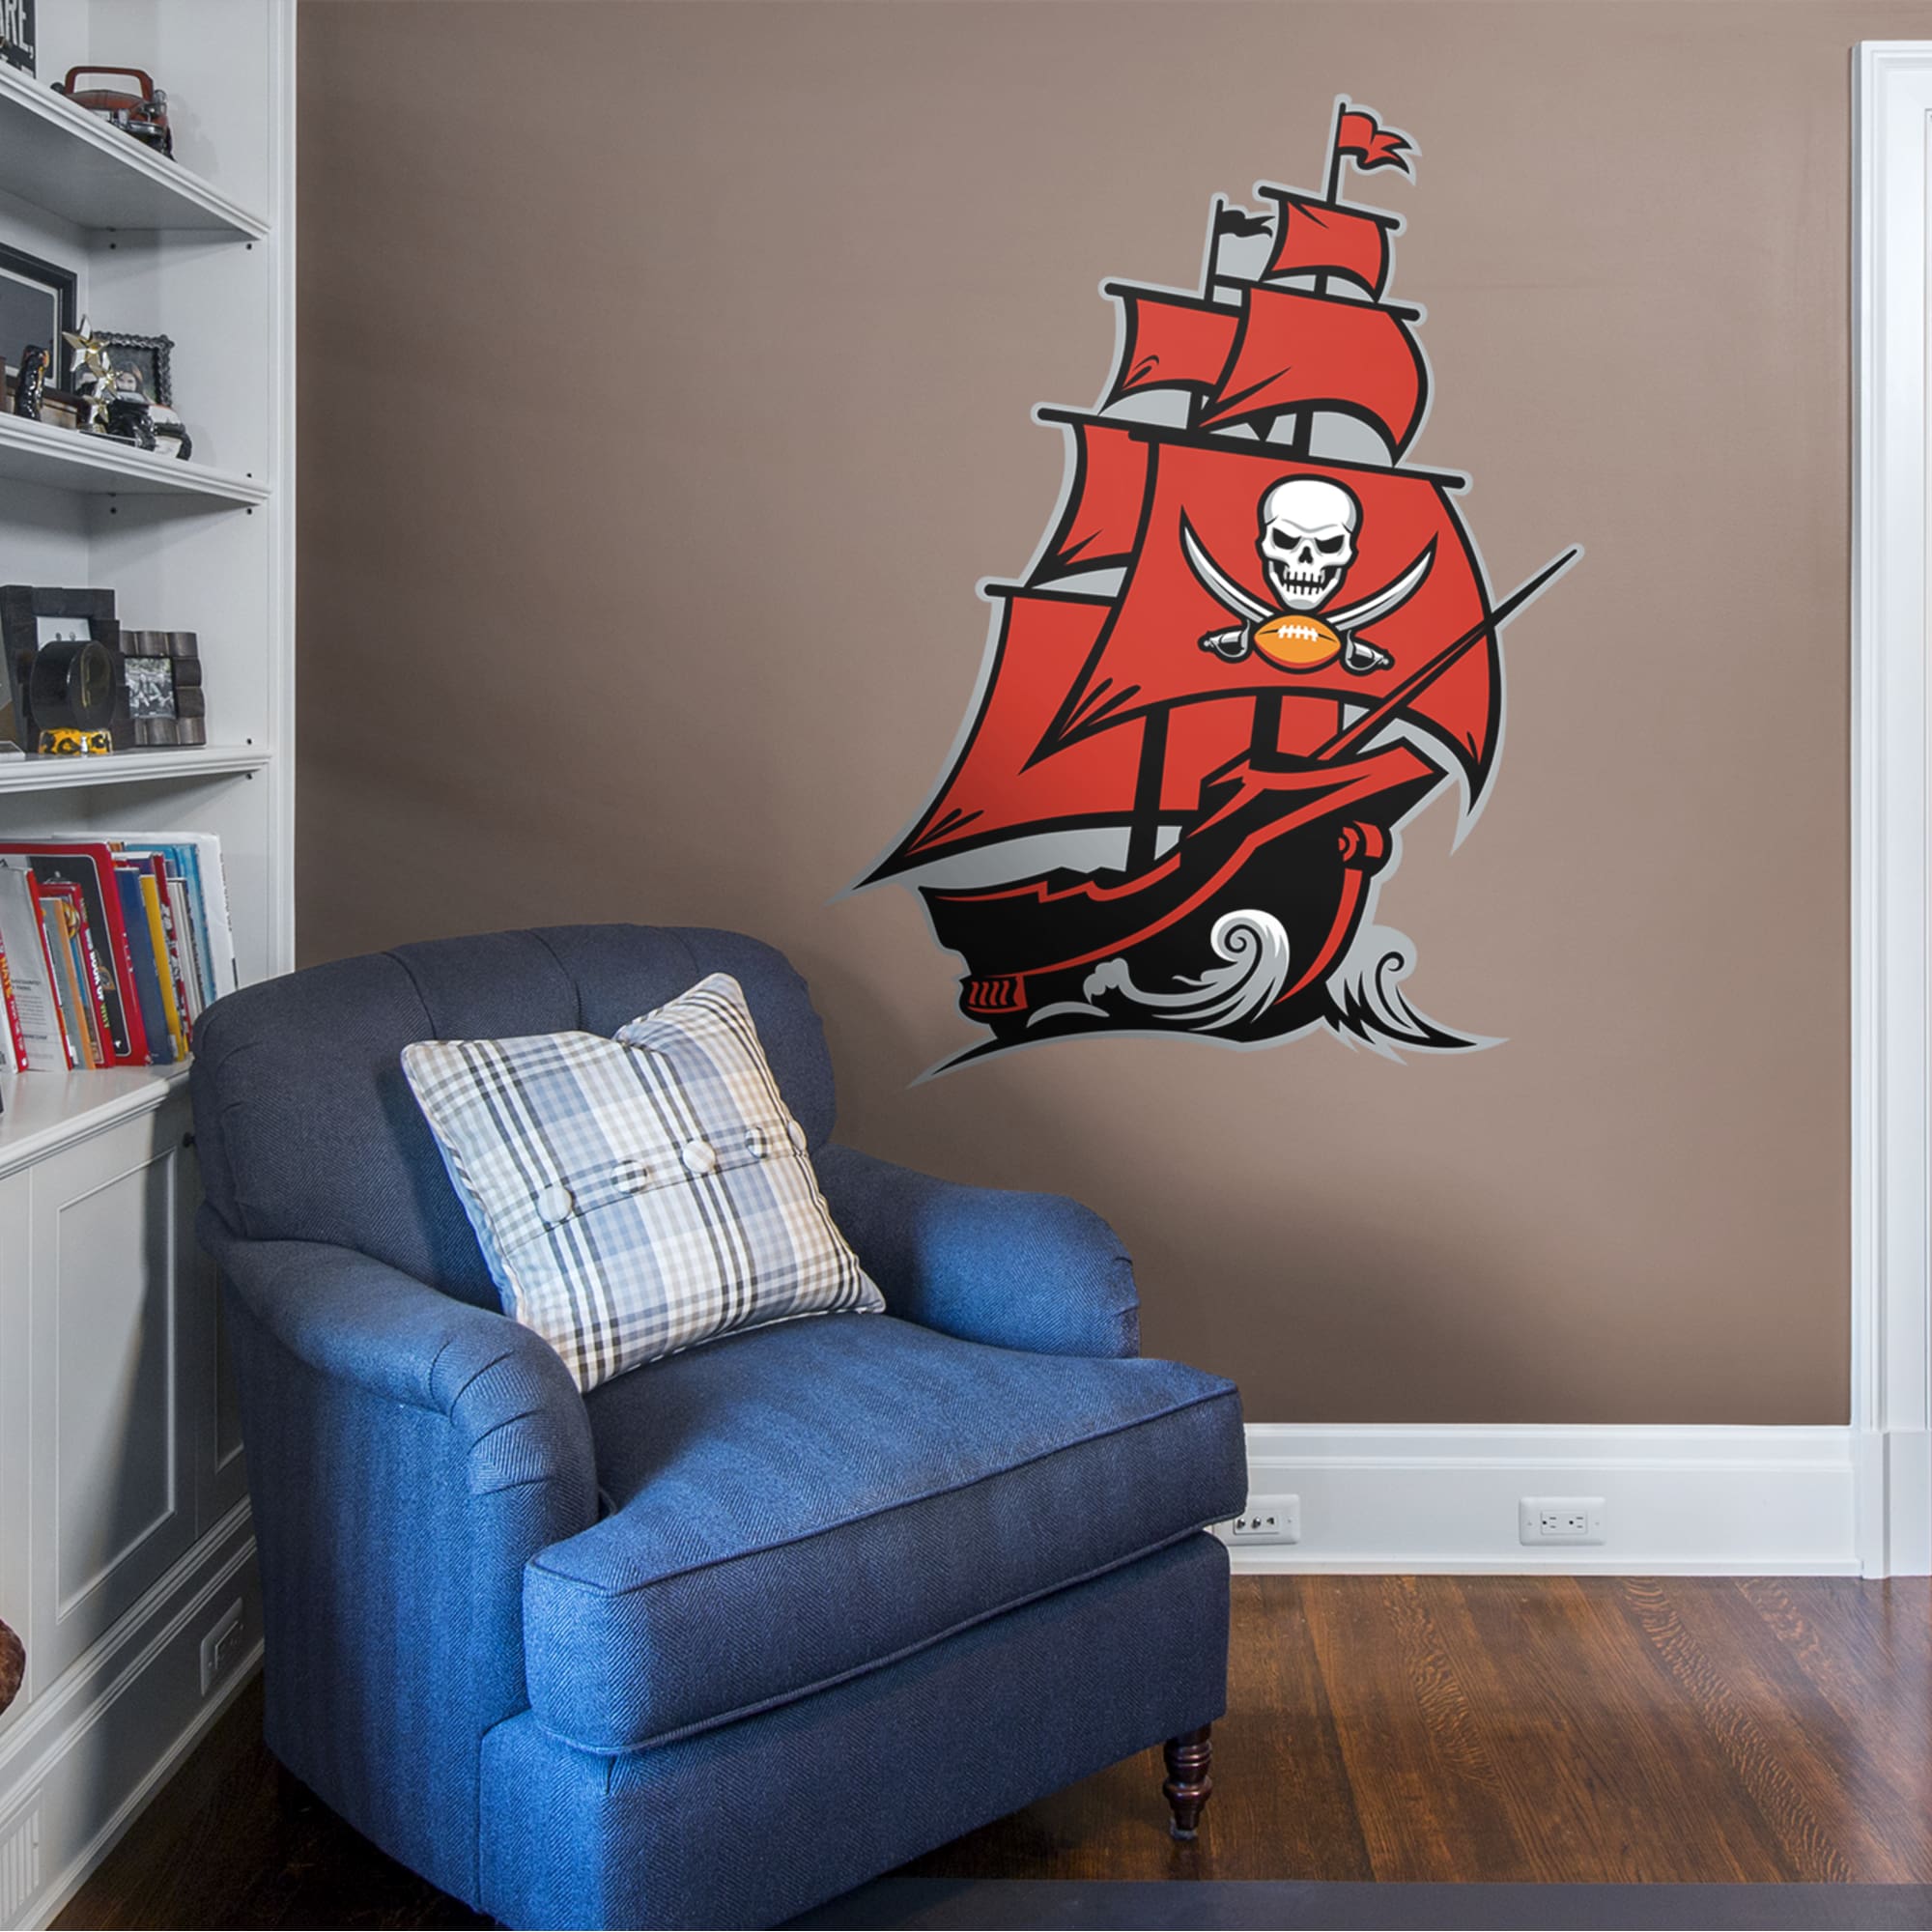 Tampa Bay Buccaneers: Pirate Ship Logo - Officially Licensed NFL Removable Wall Decal 38.0"W x 50.0"H by Fathead | Vinyl